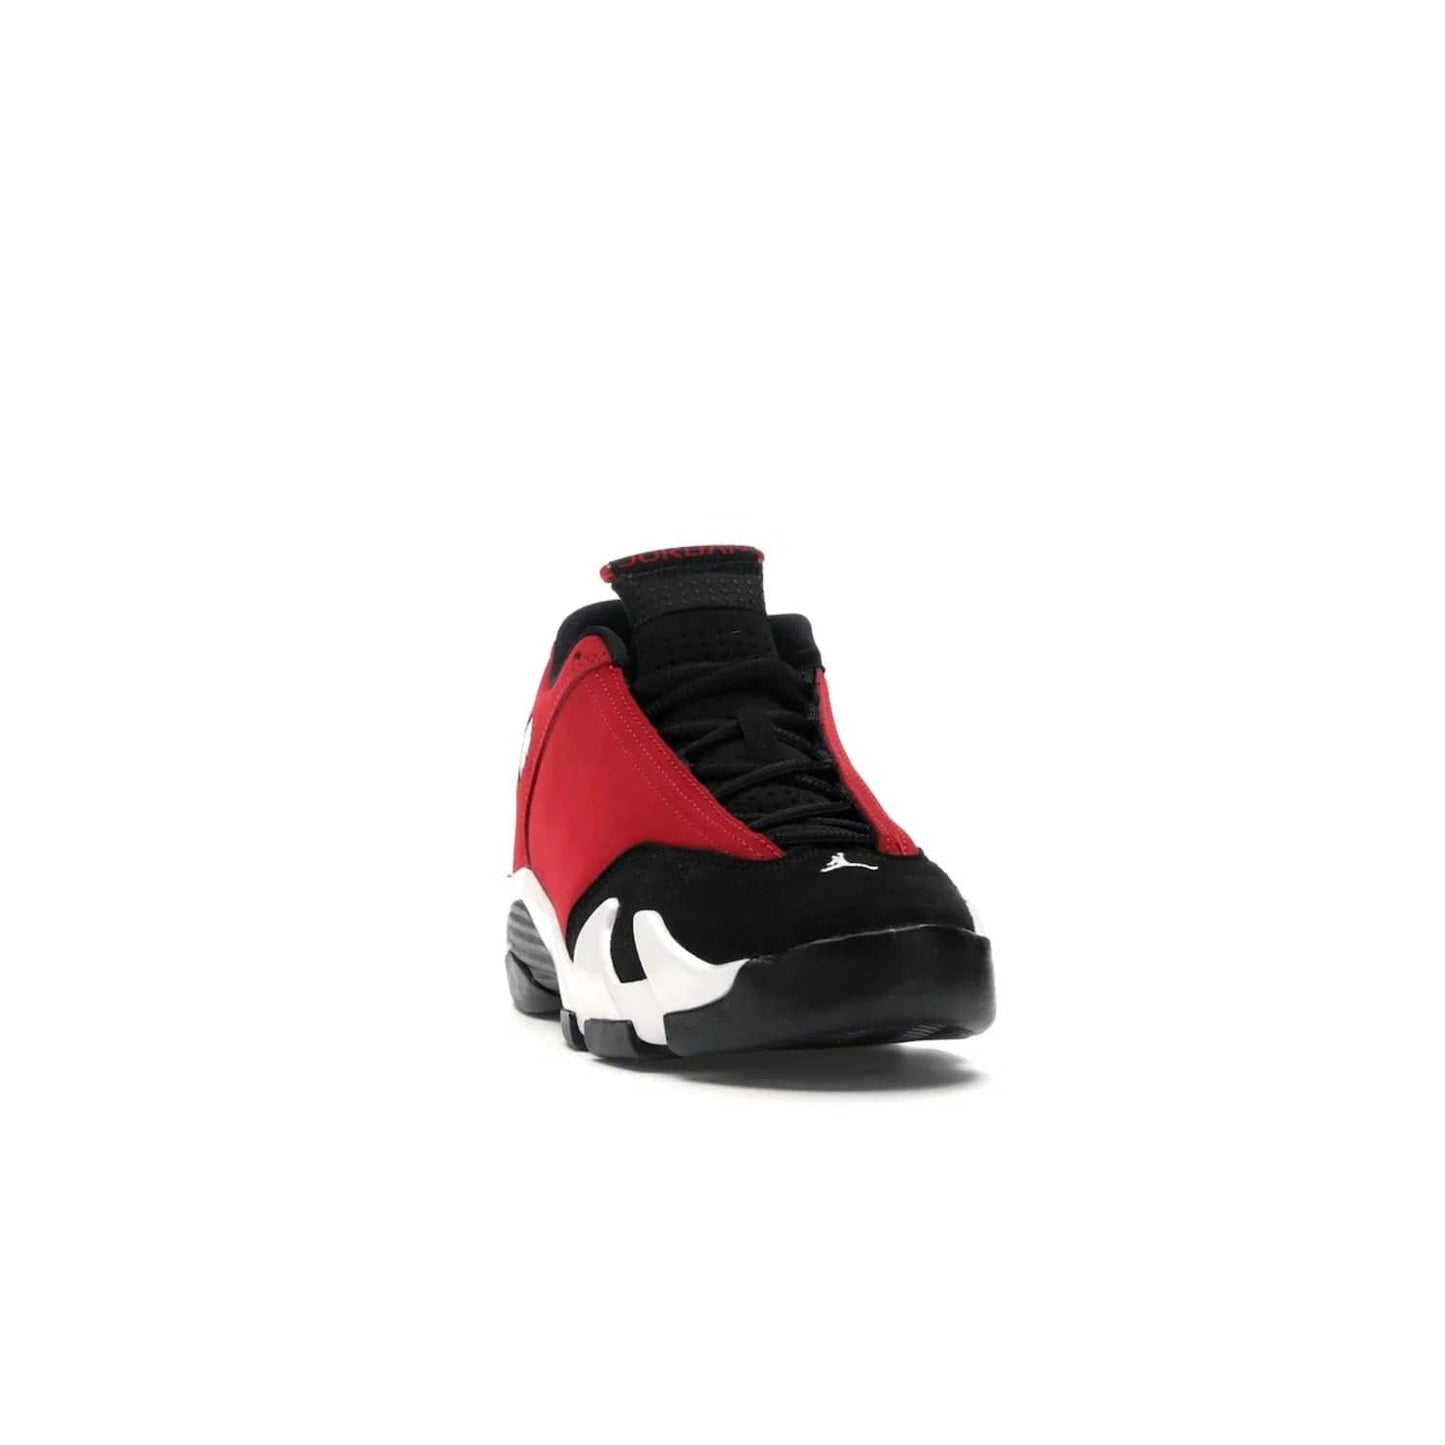 Jordan 14 Retro Gym Red Toro (GS) - Image 8 - Only at www.BallersClubKickz.com - Introducing the Air Jordan 14 Retro Toro GS – perfect for young grade schoolers. Combining black and red suede, Zoom Air cushioning and a Jumpman logo. Get yours on 2 July for $140!